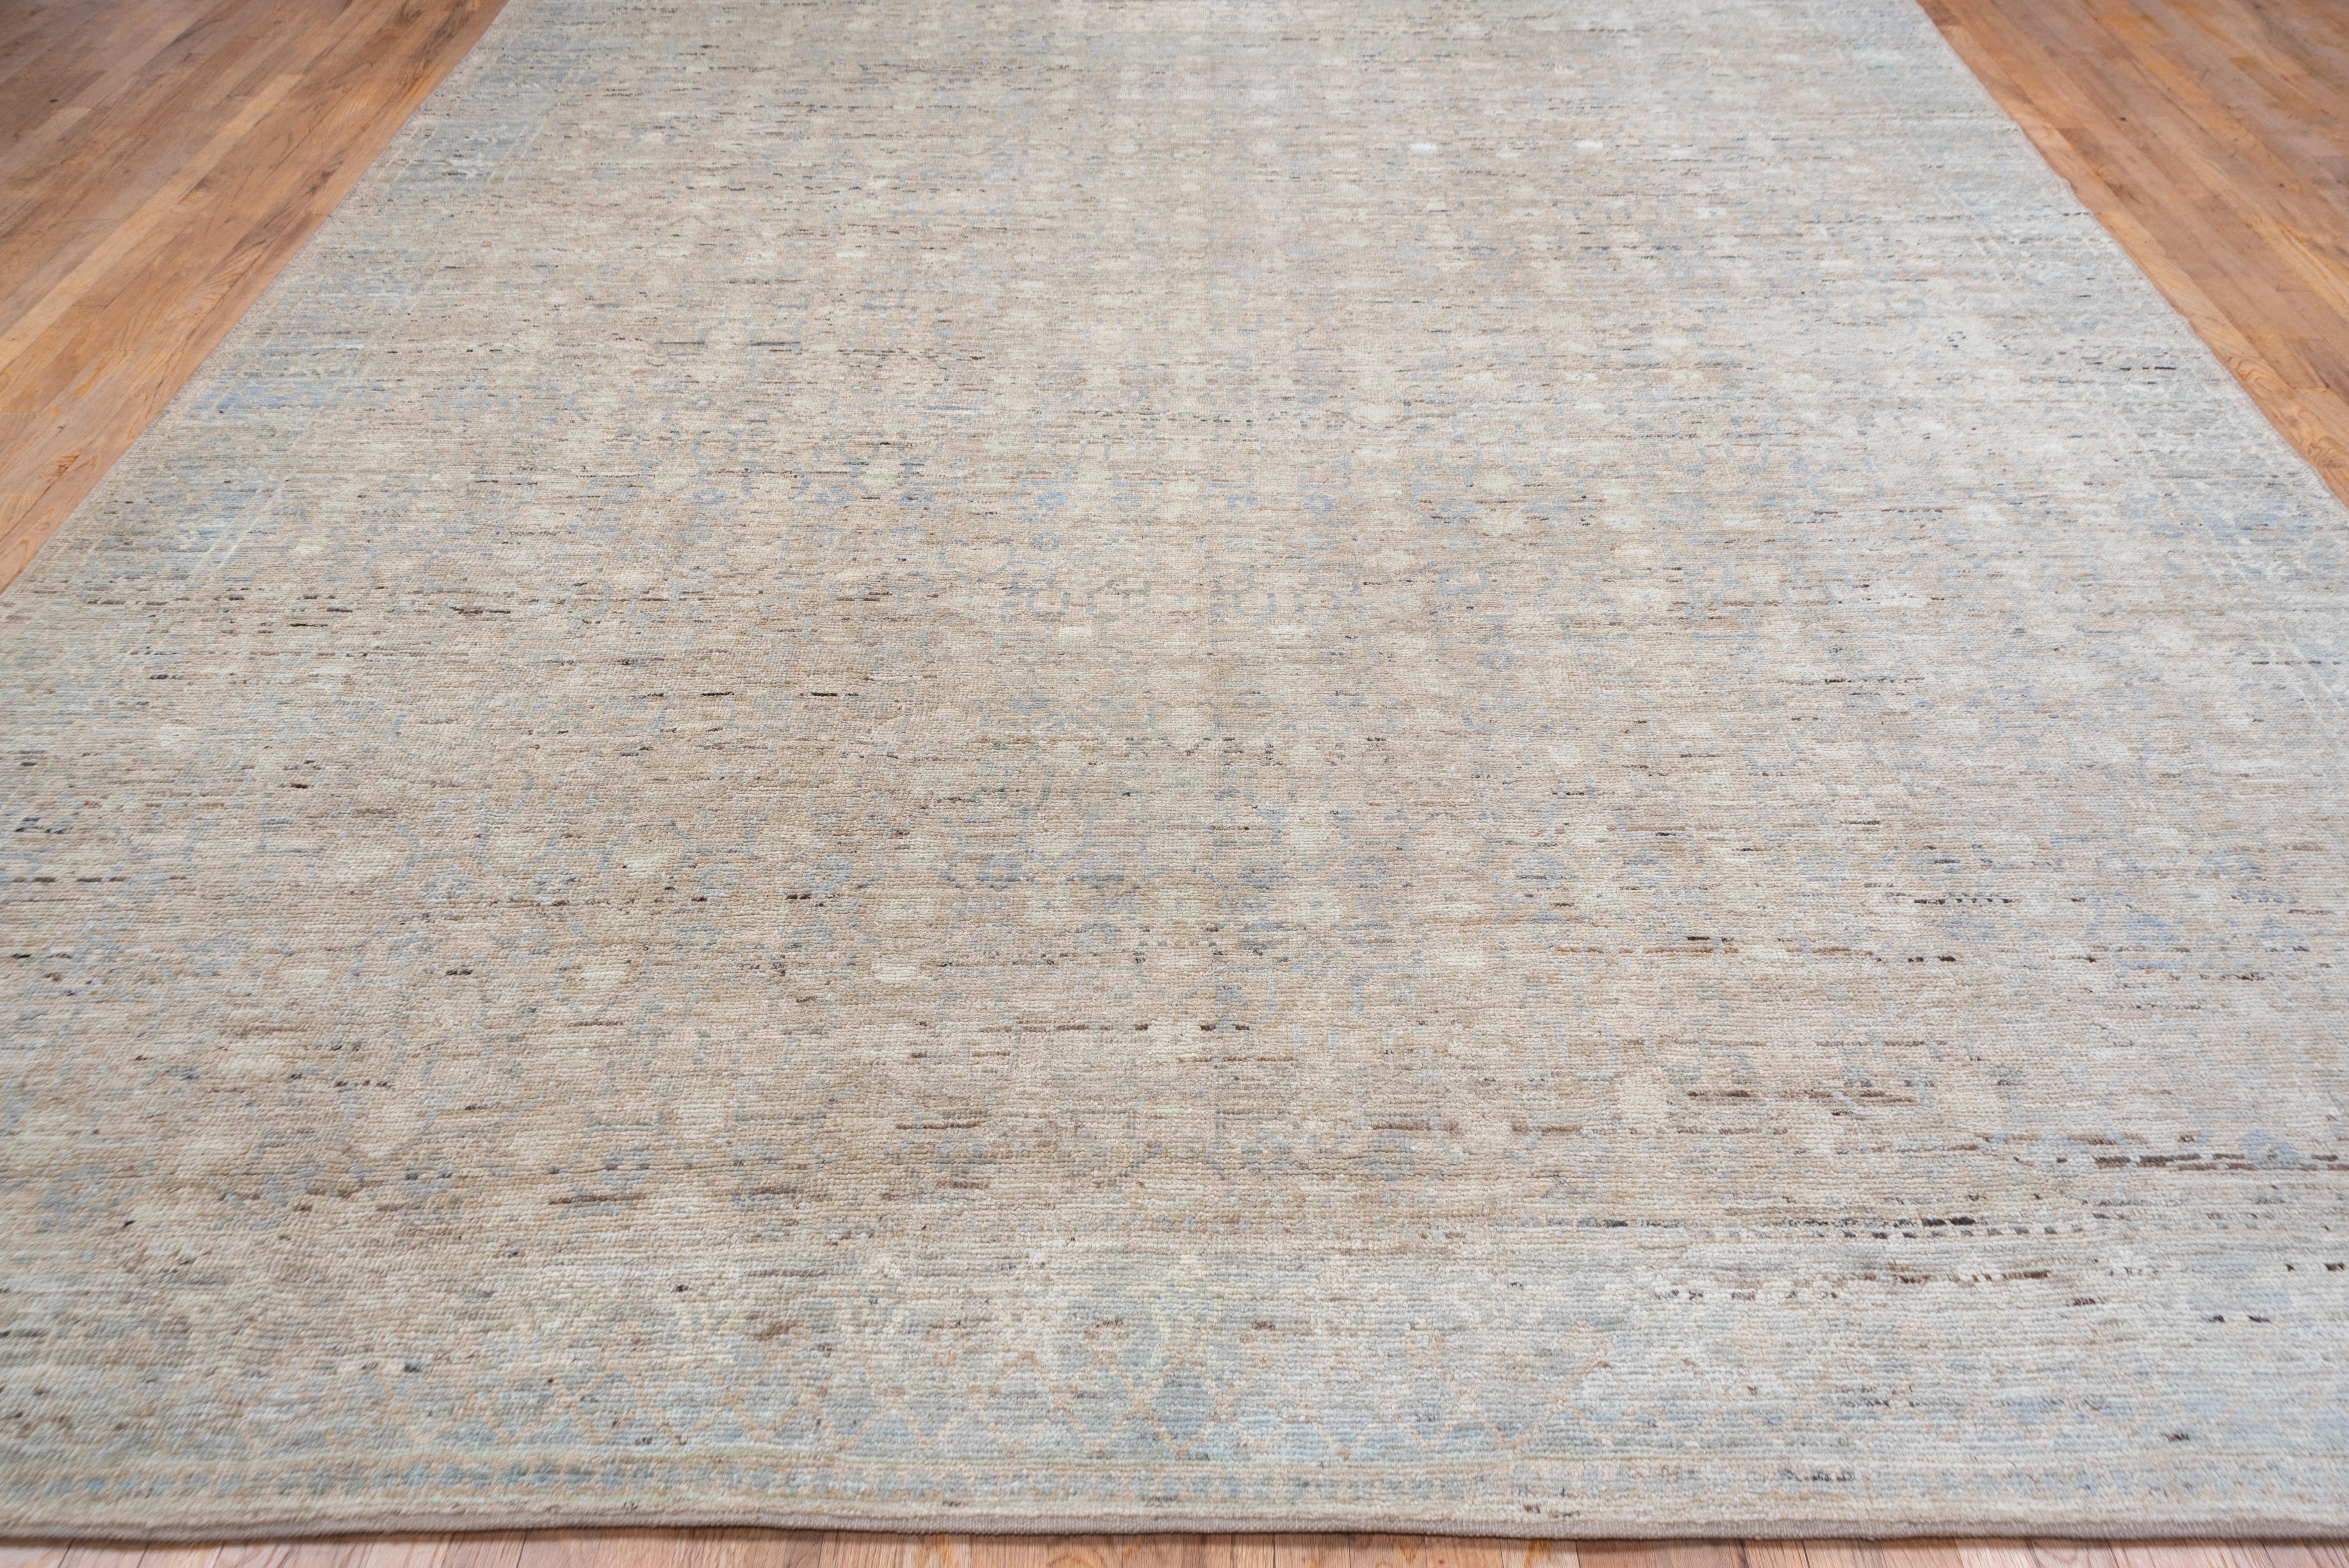 Afghan Modern Moroccan Style Rug, Linen and Baby Blue All-Over Field, Soft Medium Pile